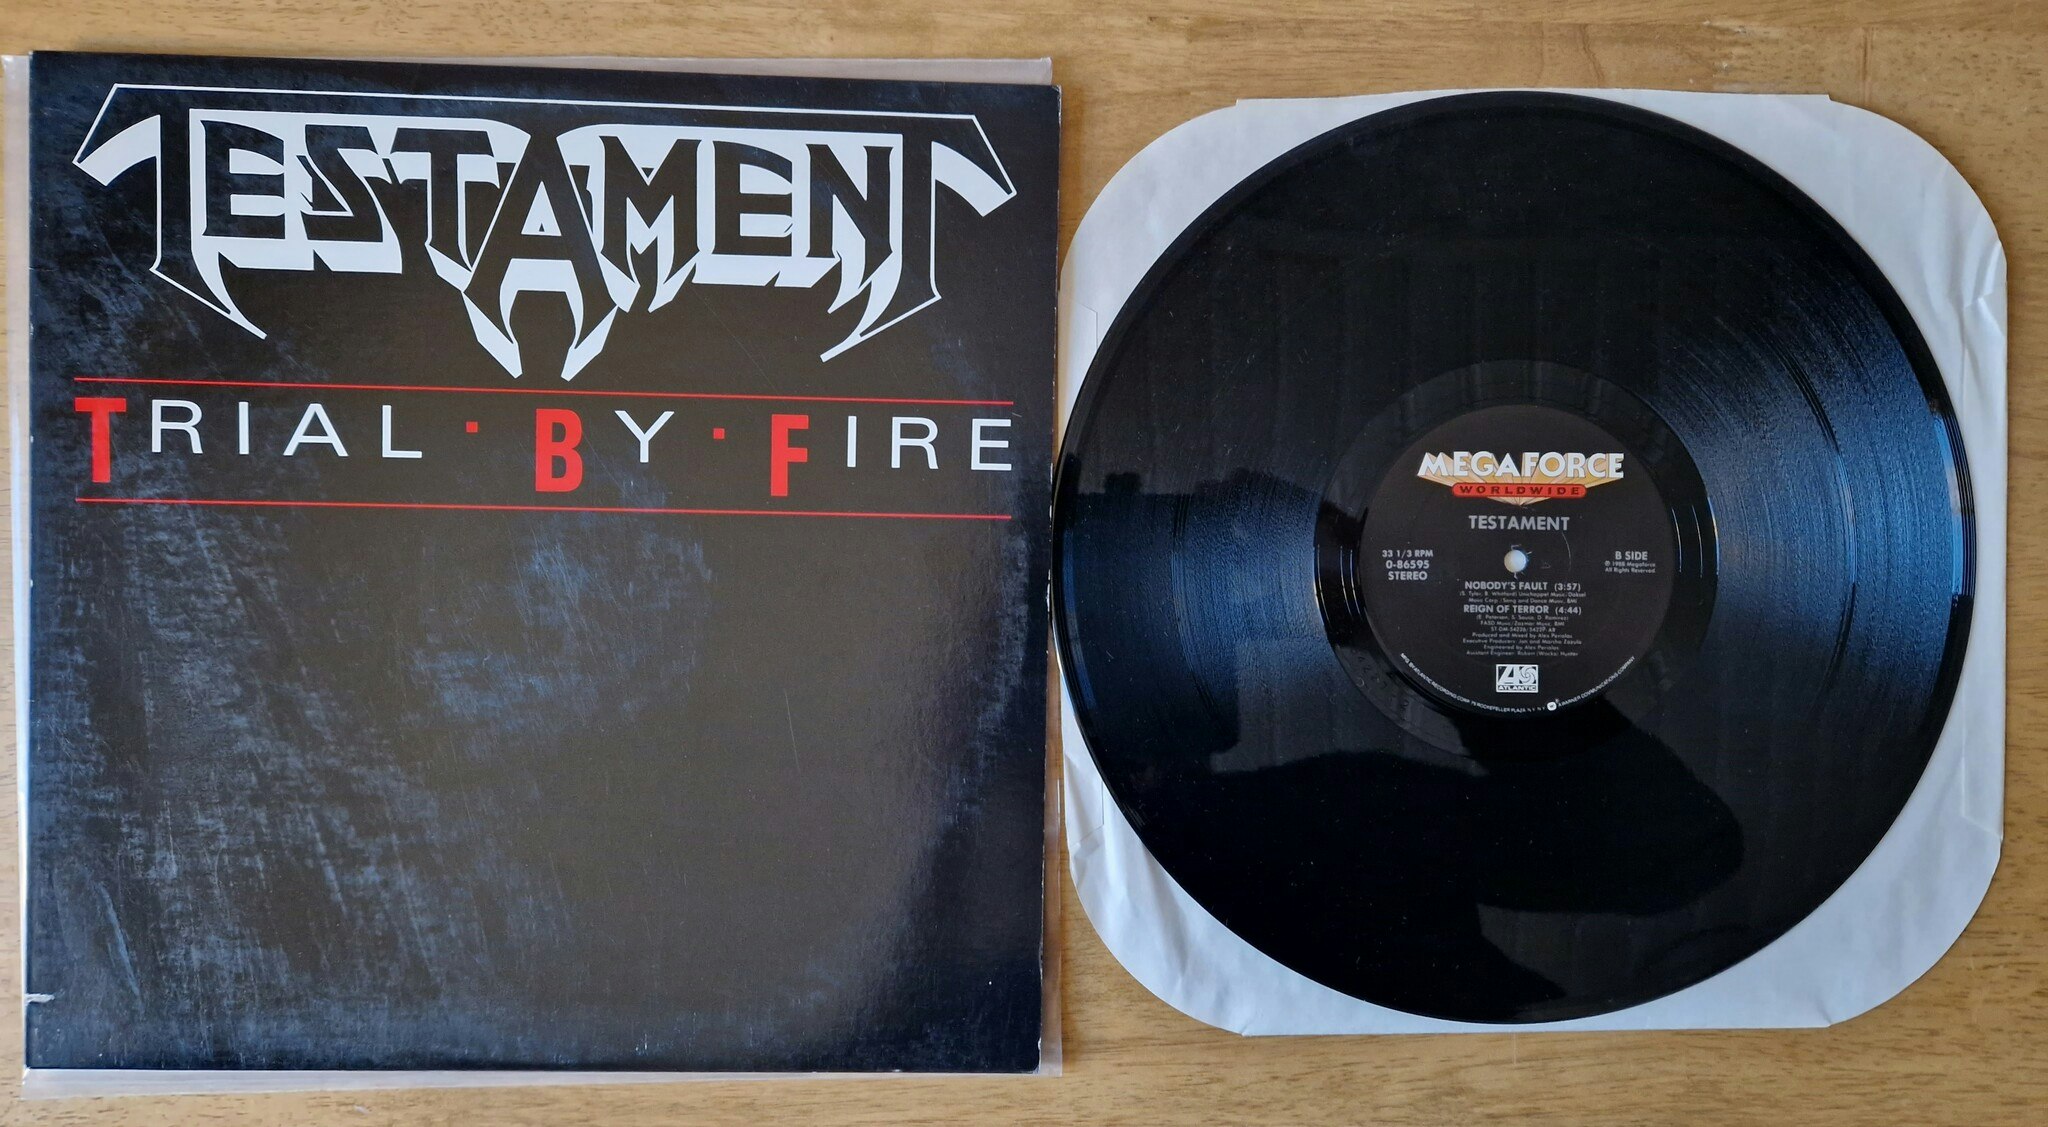 Testament, Trial by fire. Vinyl EP